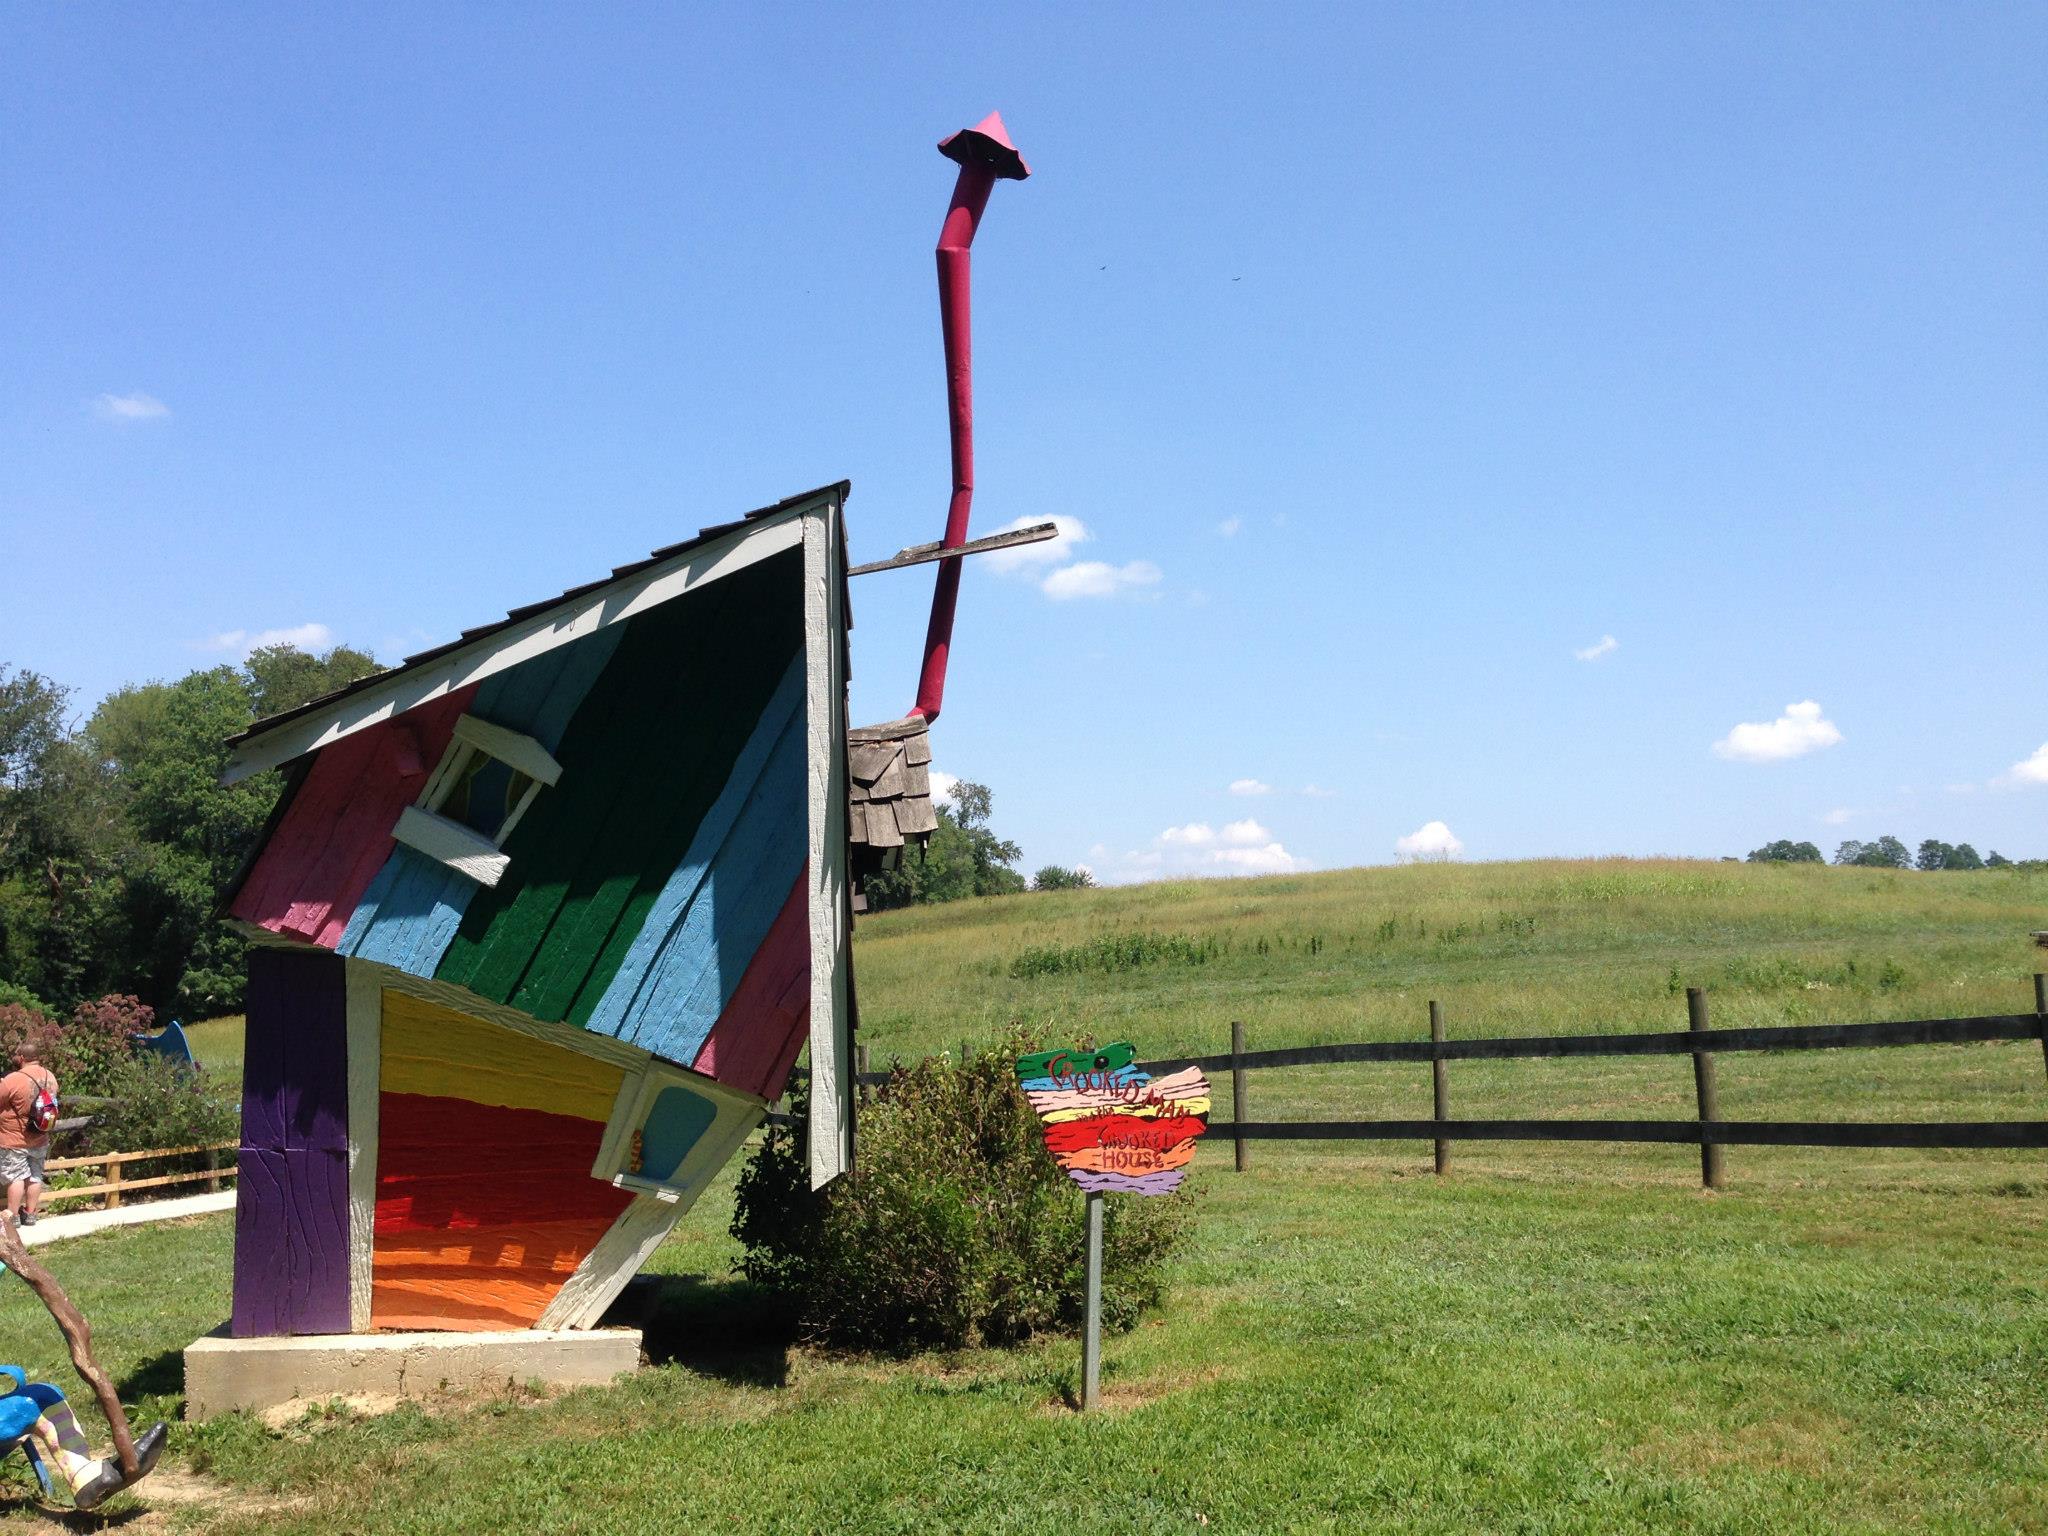 House sculpture from the Enchanted Forest in field at Clark's Elioak Farm